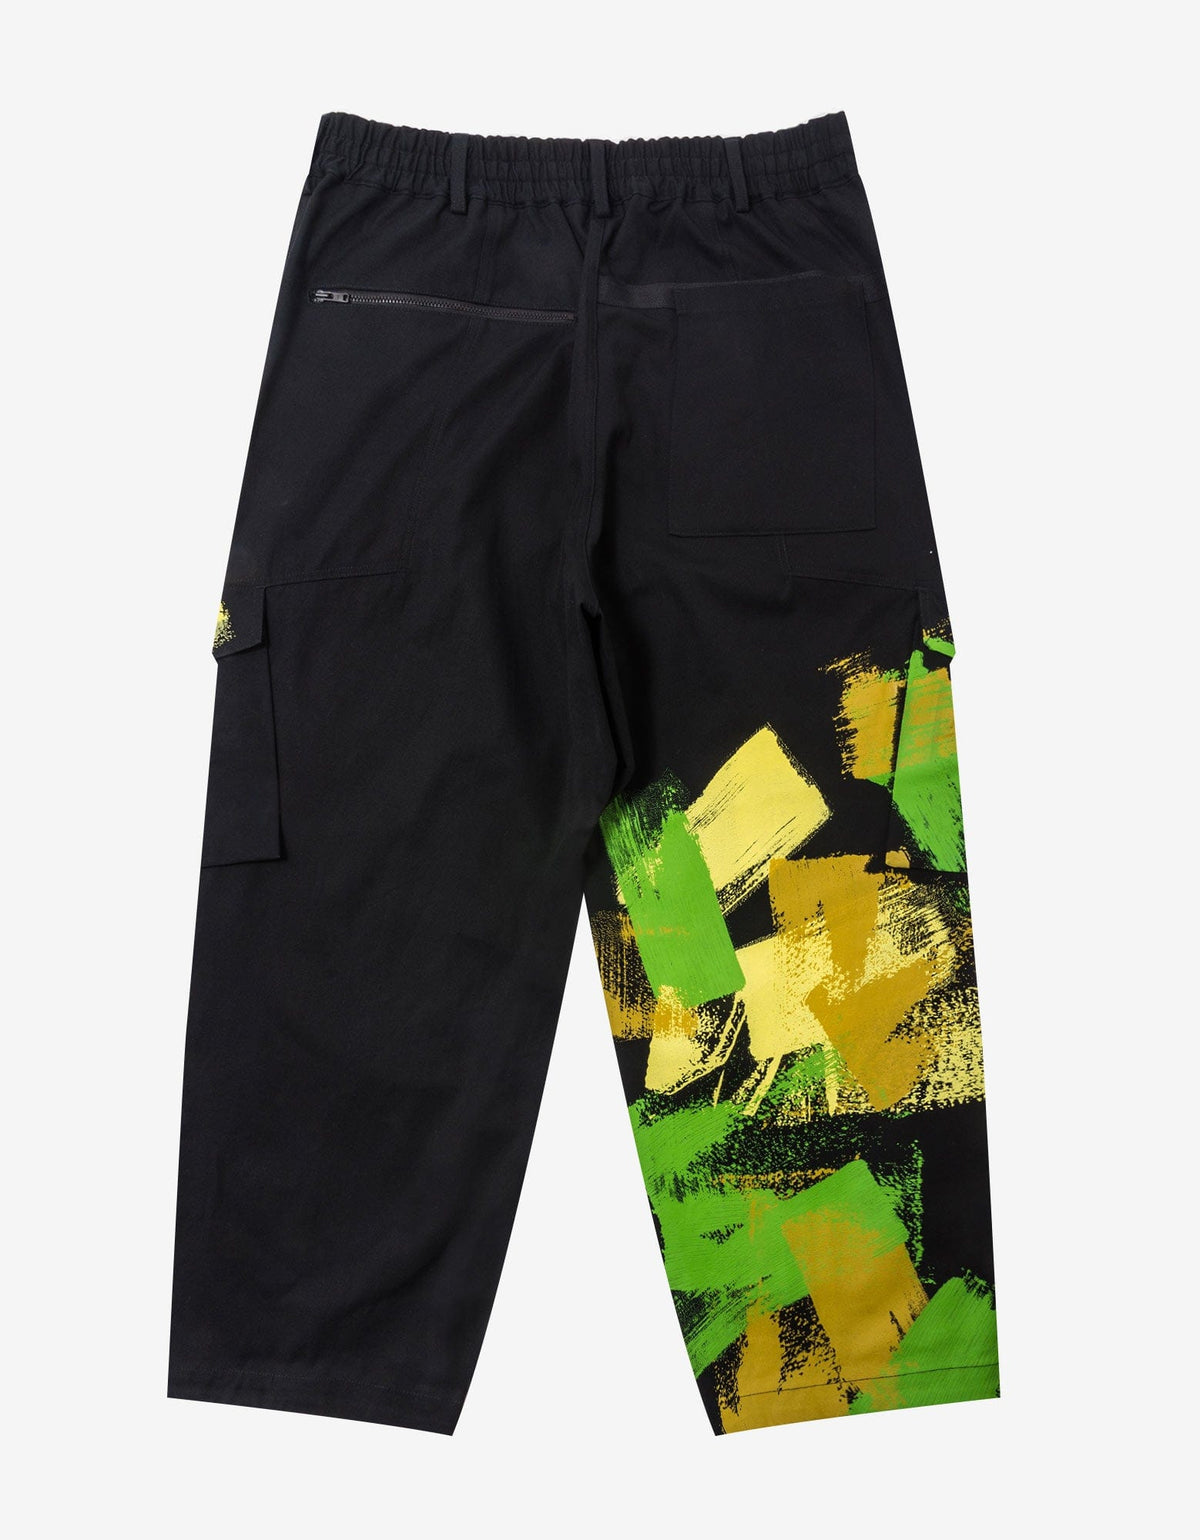 Y-3 Black Graphic Workwear Cargo Trousers